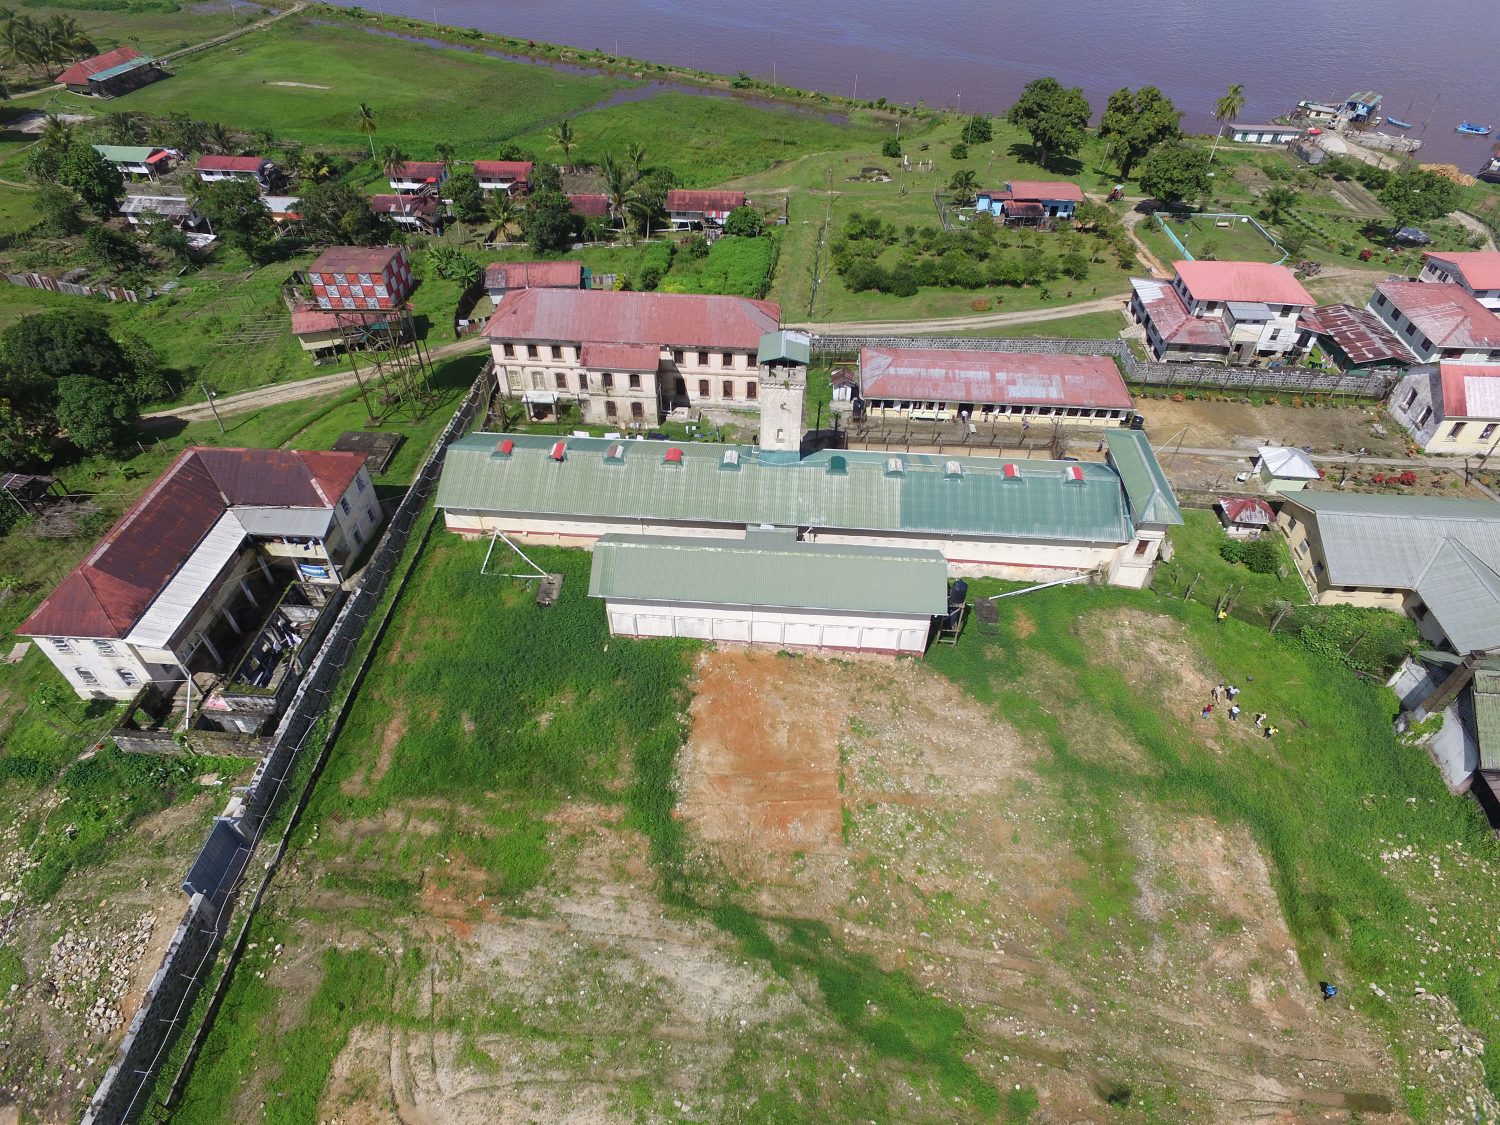 An overhead view of the Mazaruni Prison. The works on the prison include the renovation of the Bachelors’ Quarters, trade shop, the dormitories, living quarters, spinster quarters and the senior bachelors’ quarters at the prison. (Department of Public Information photo)